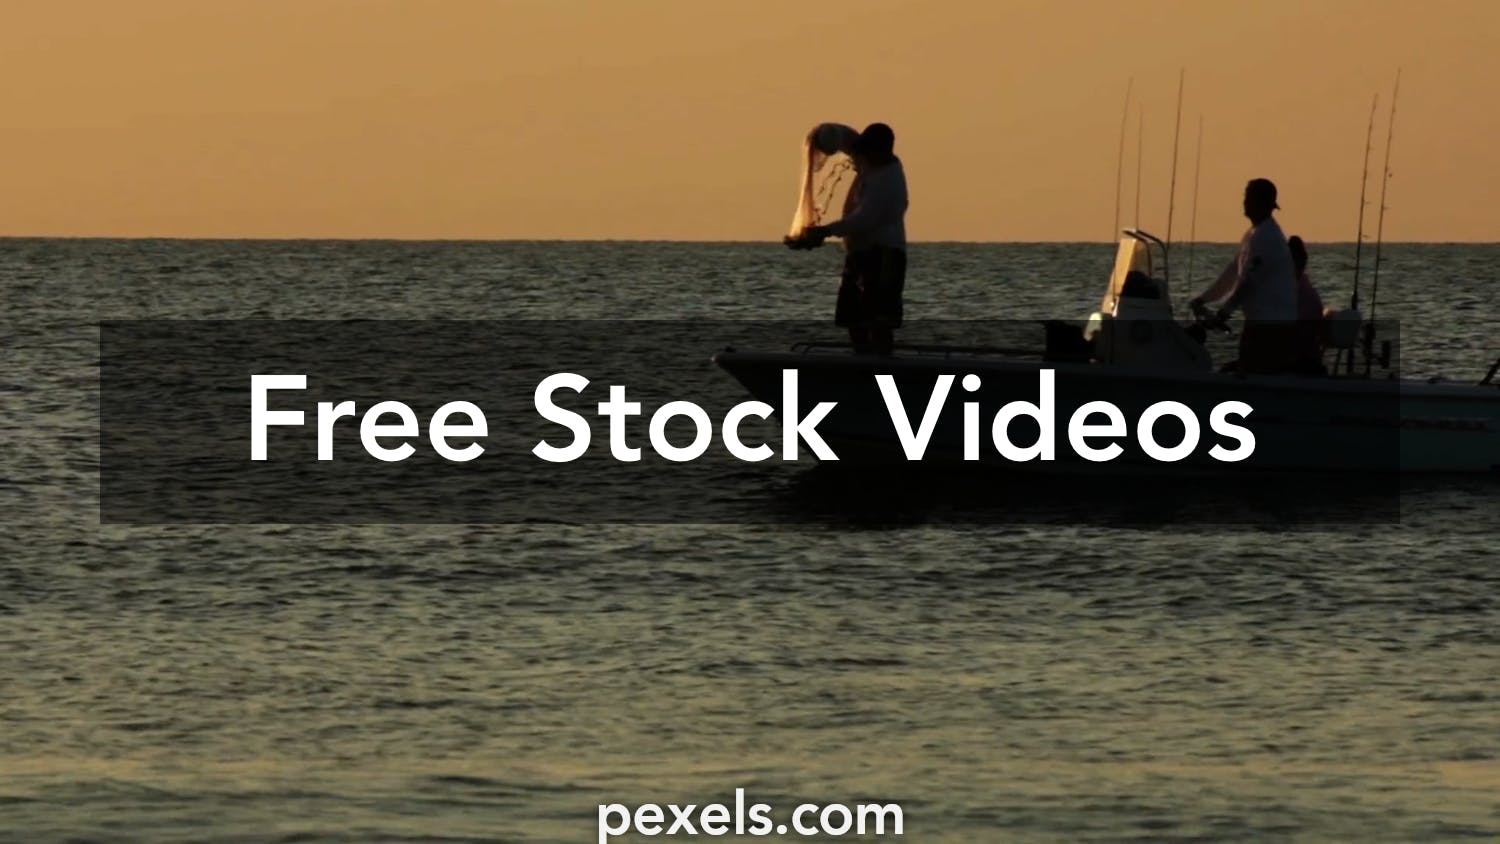 1,688 Cast Net Fishing Stock Video Footage - 4K and HD Video Clips